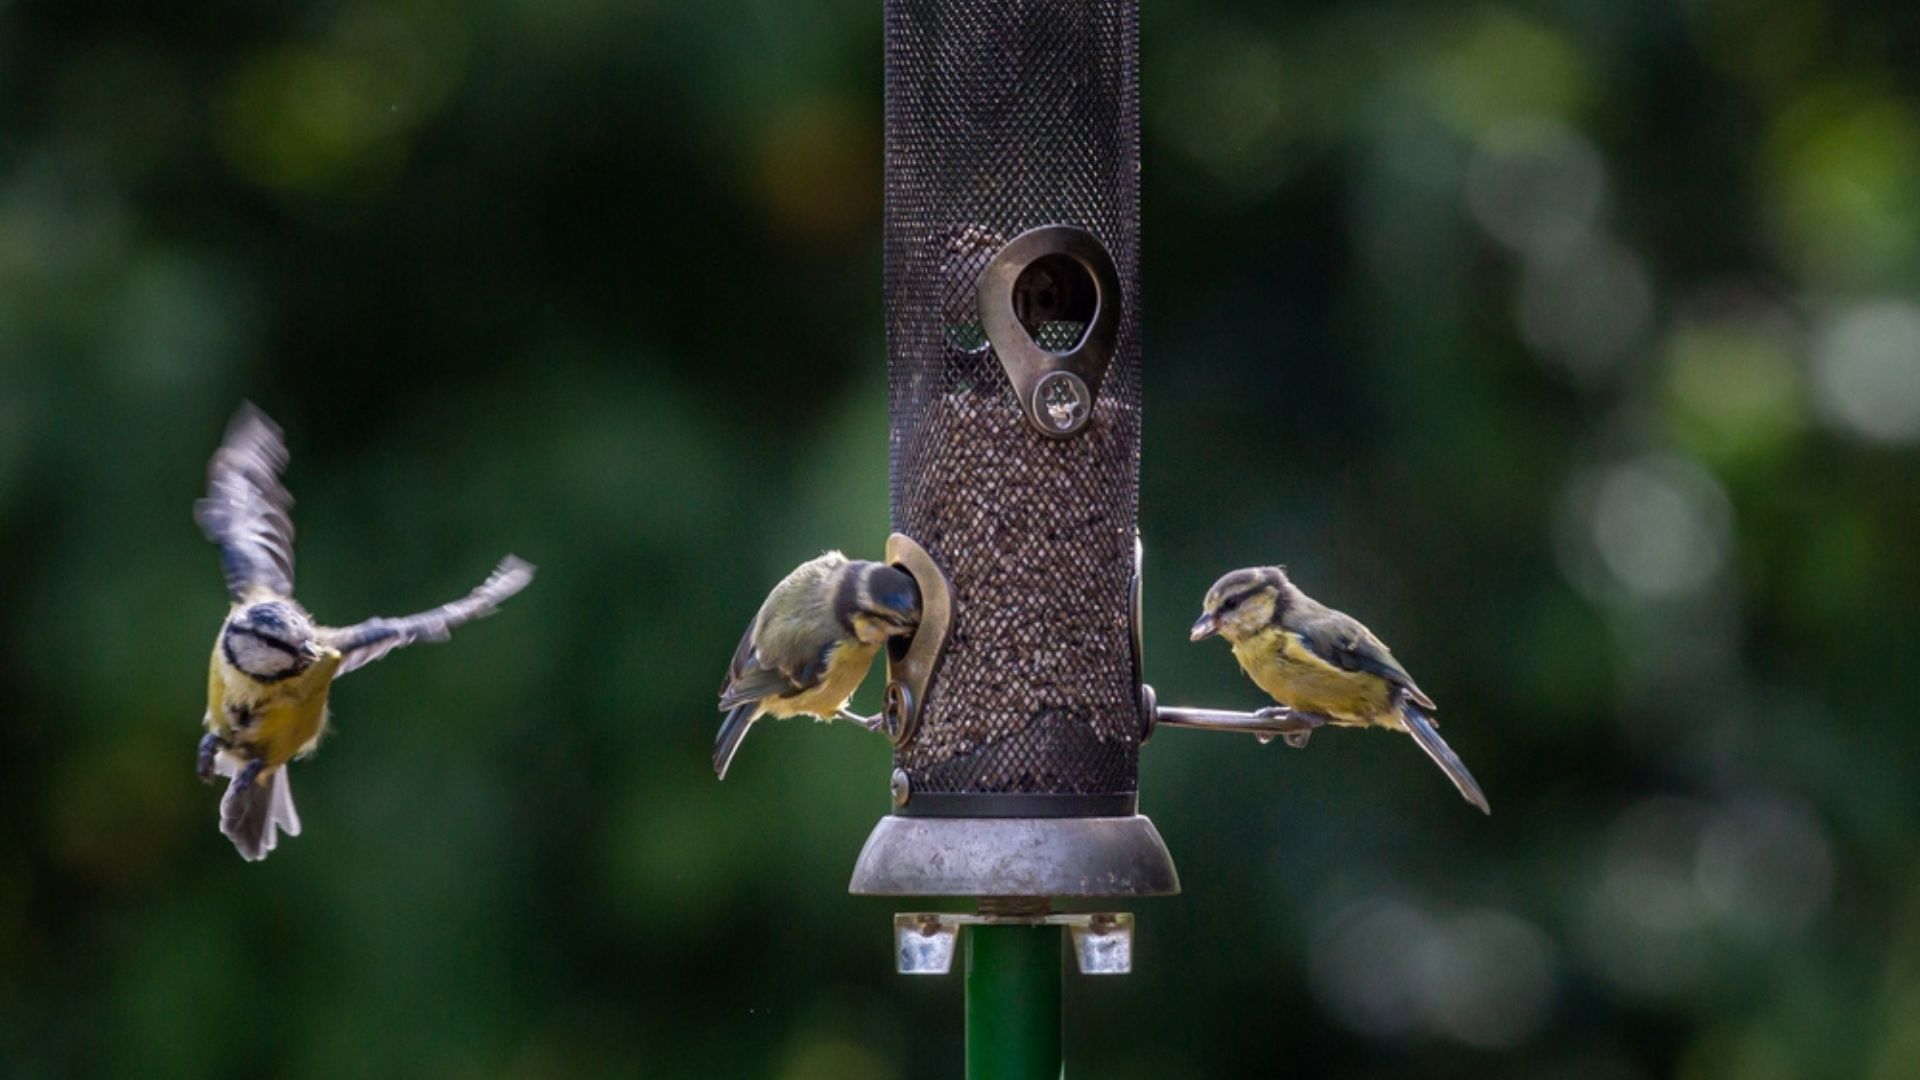 Is Using Soap To Clean Bird Feeders A Safe Option Or Could It Harm Your Feathered Friends?